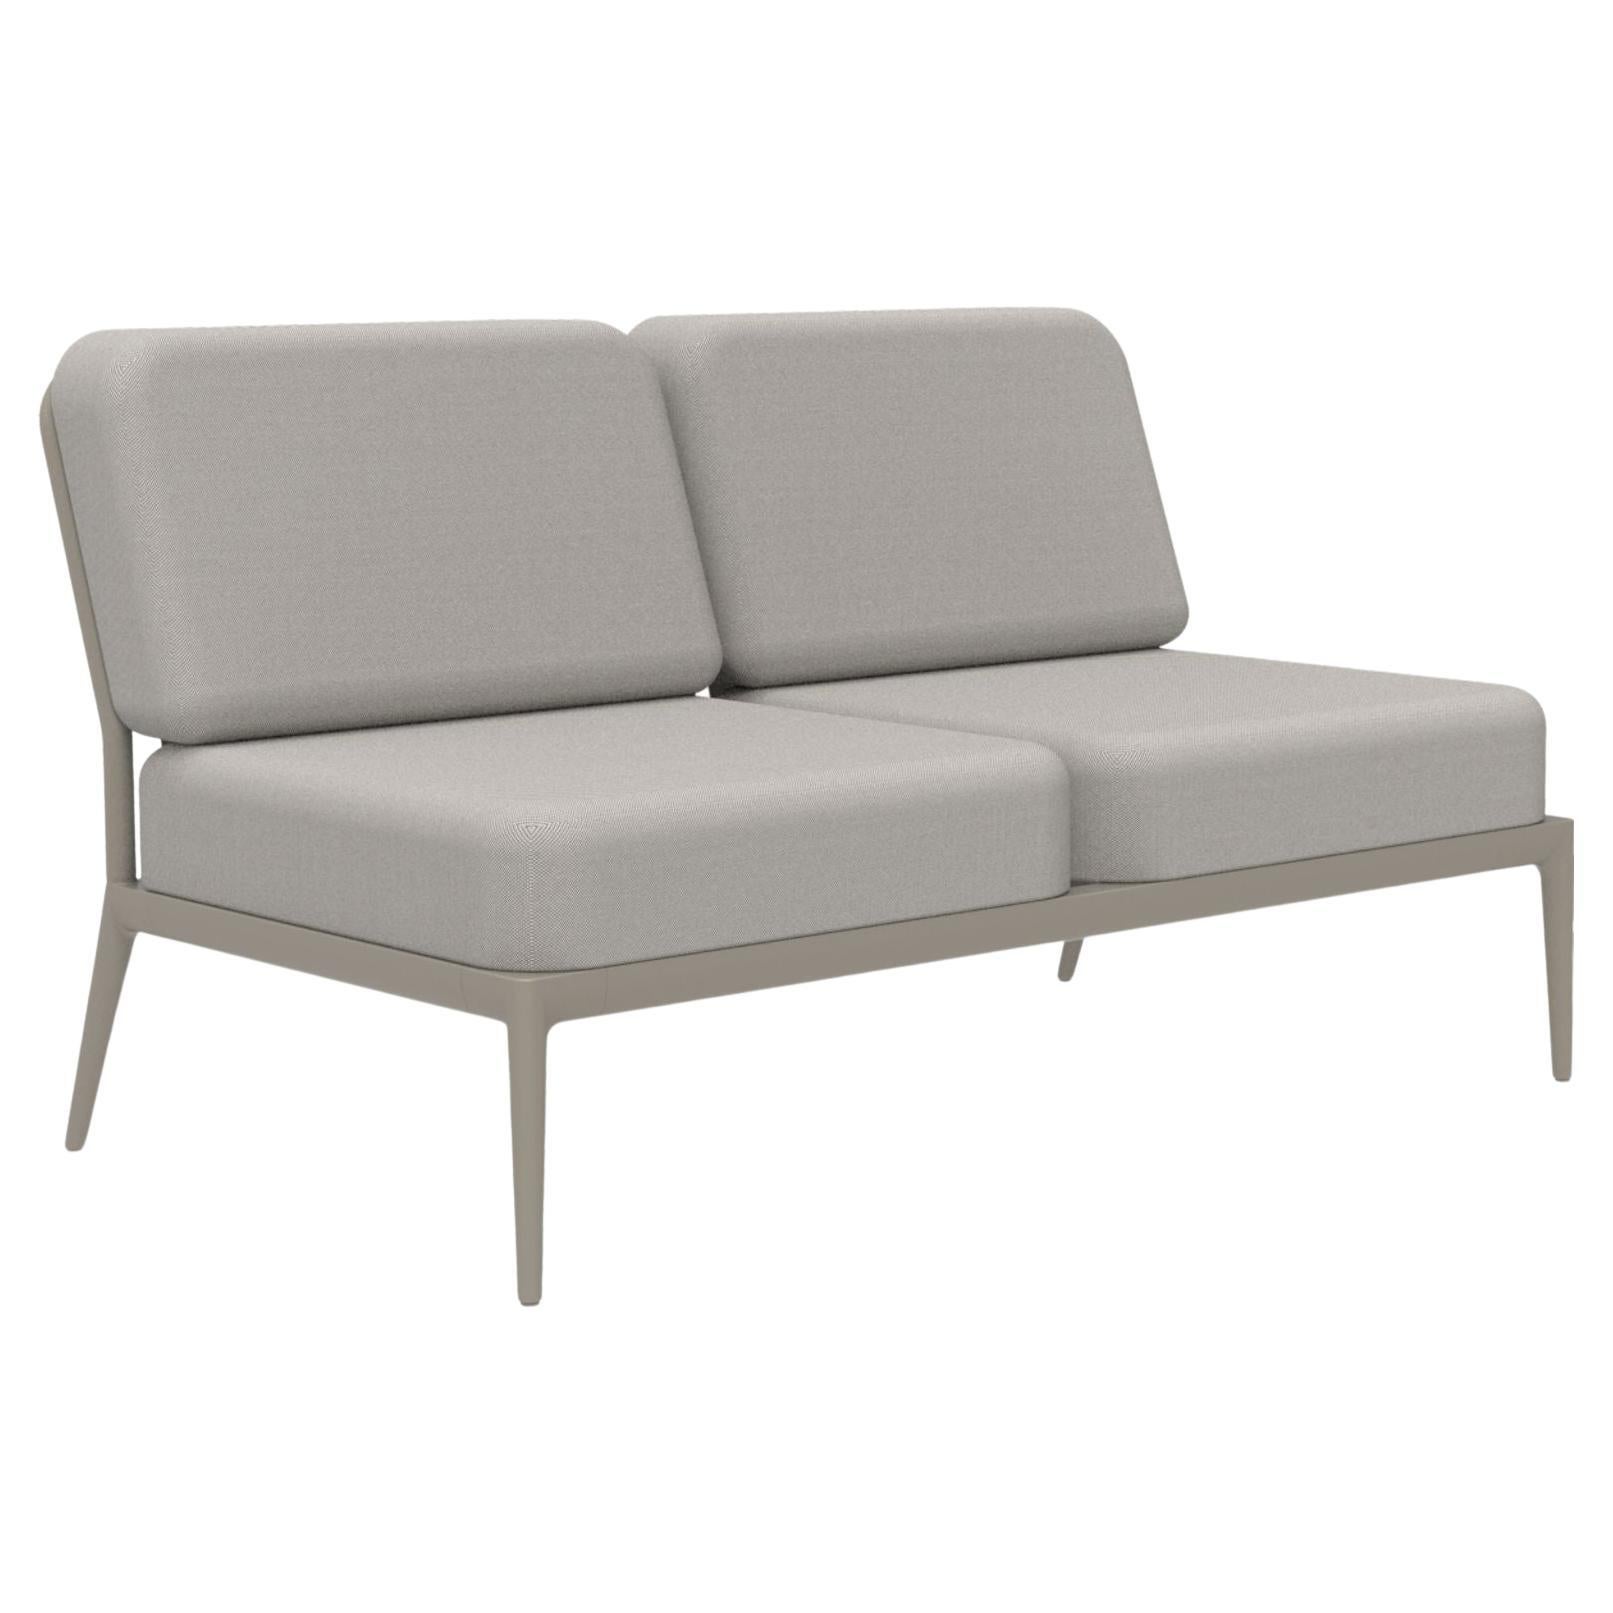 Ribbons Cream Double Central Modular Sofa by Mowee For Sale